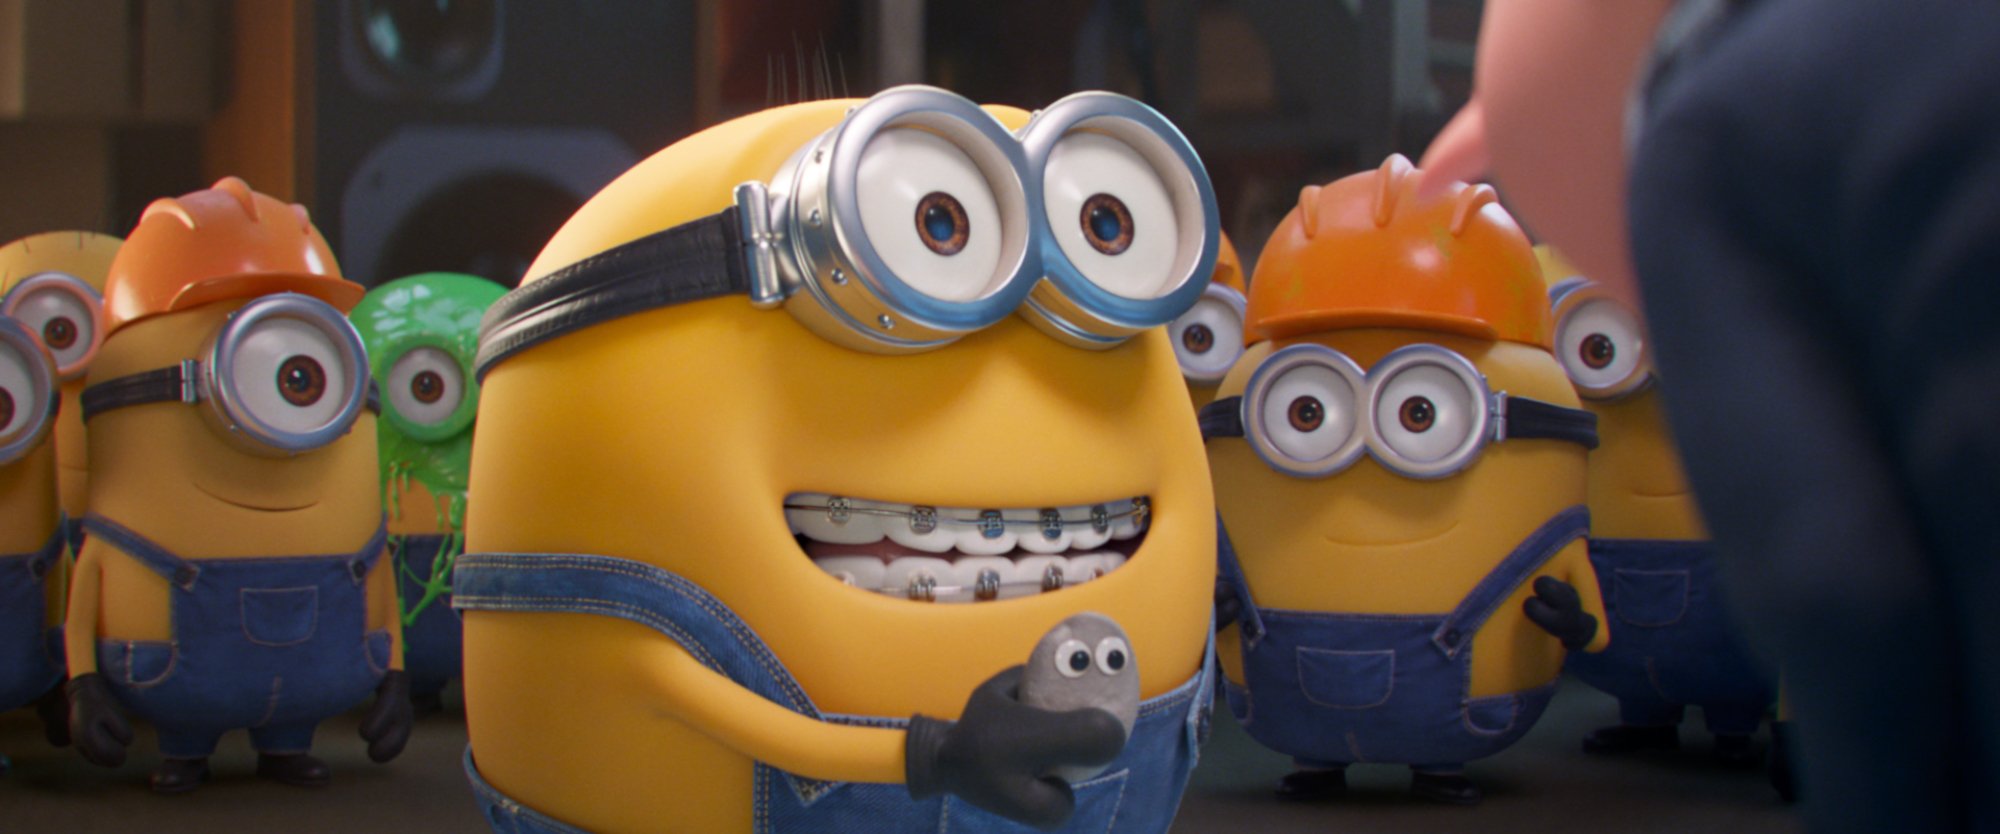 'Minions: The Rise of Guru' Minion Otto smiling while wearing braces and holding a rock with googly eyes